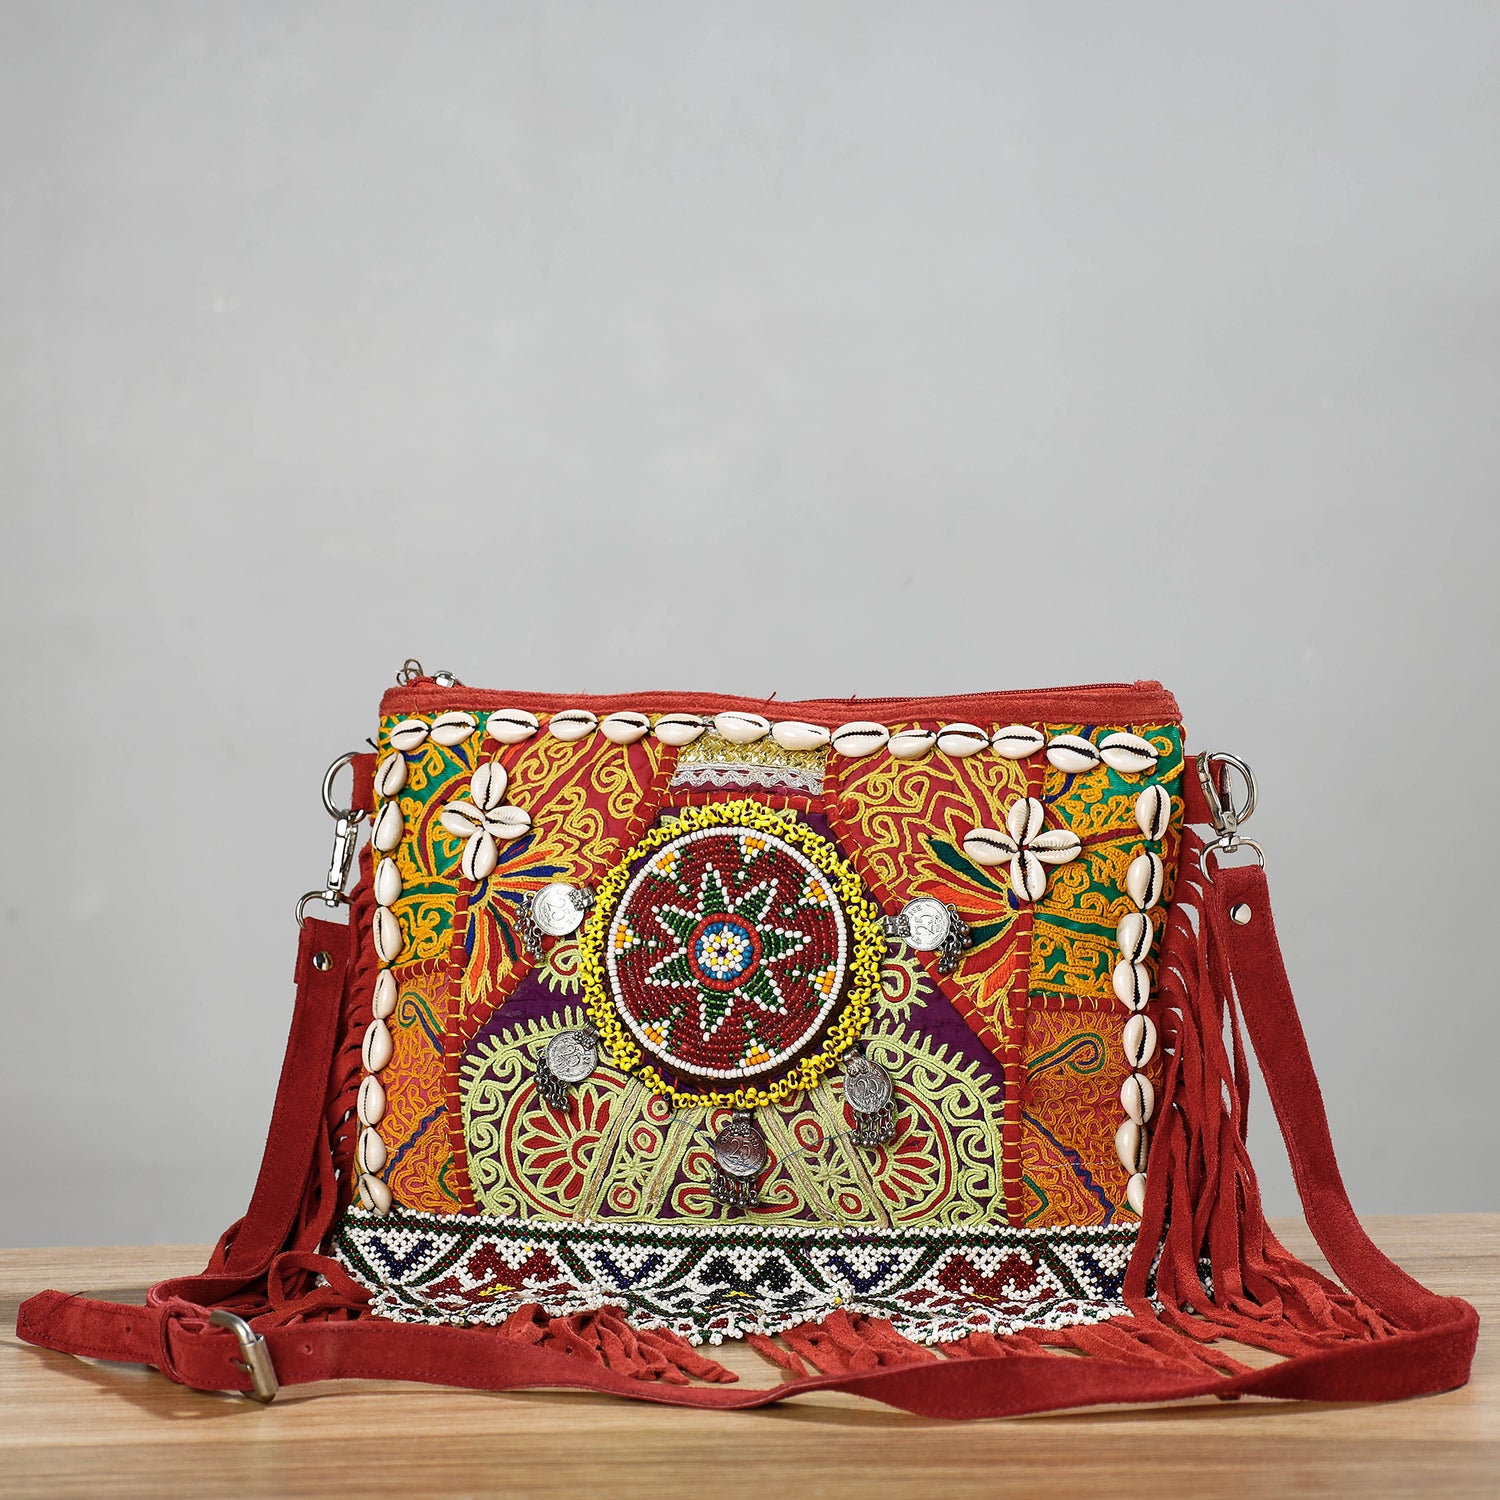 Banjara Vintage Embroidery Beads, Shell & Coin Patchwork Sling Bag